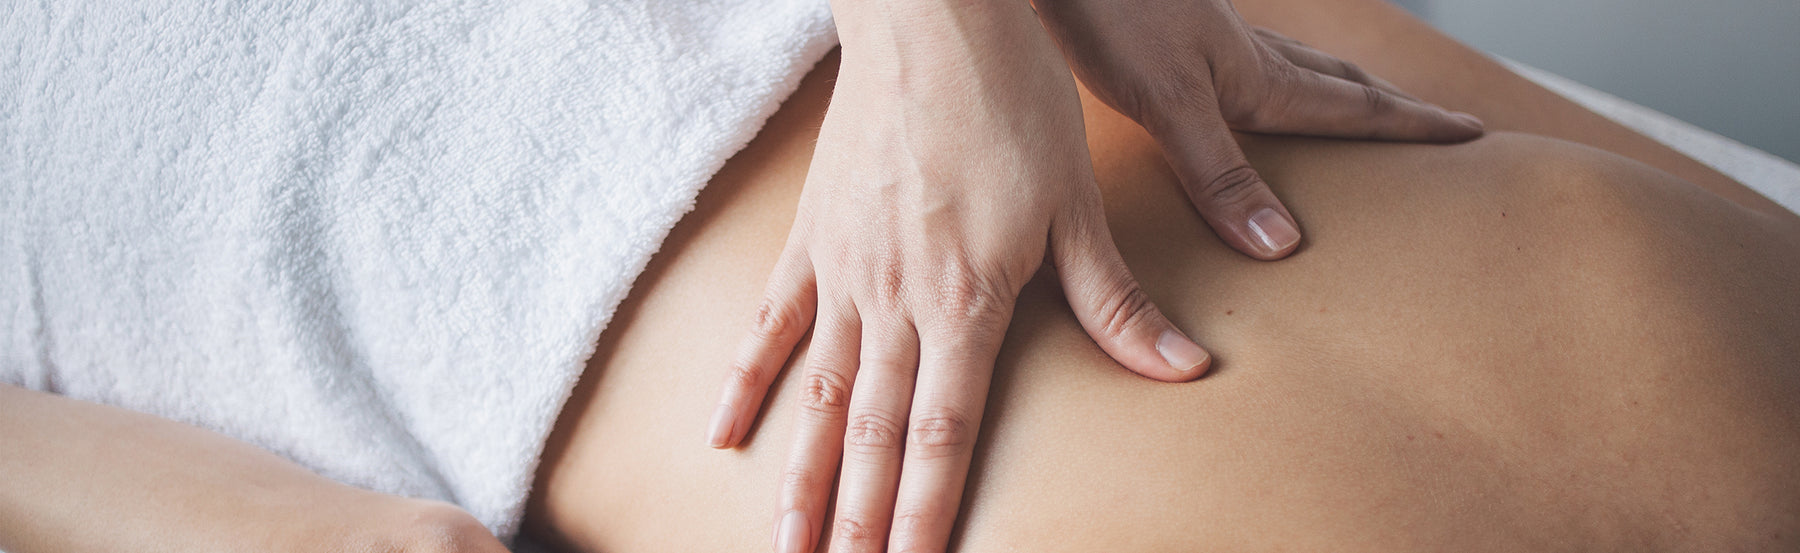 What is Evidence Based Massage?